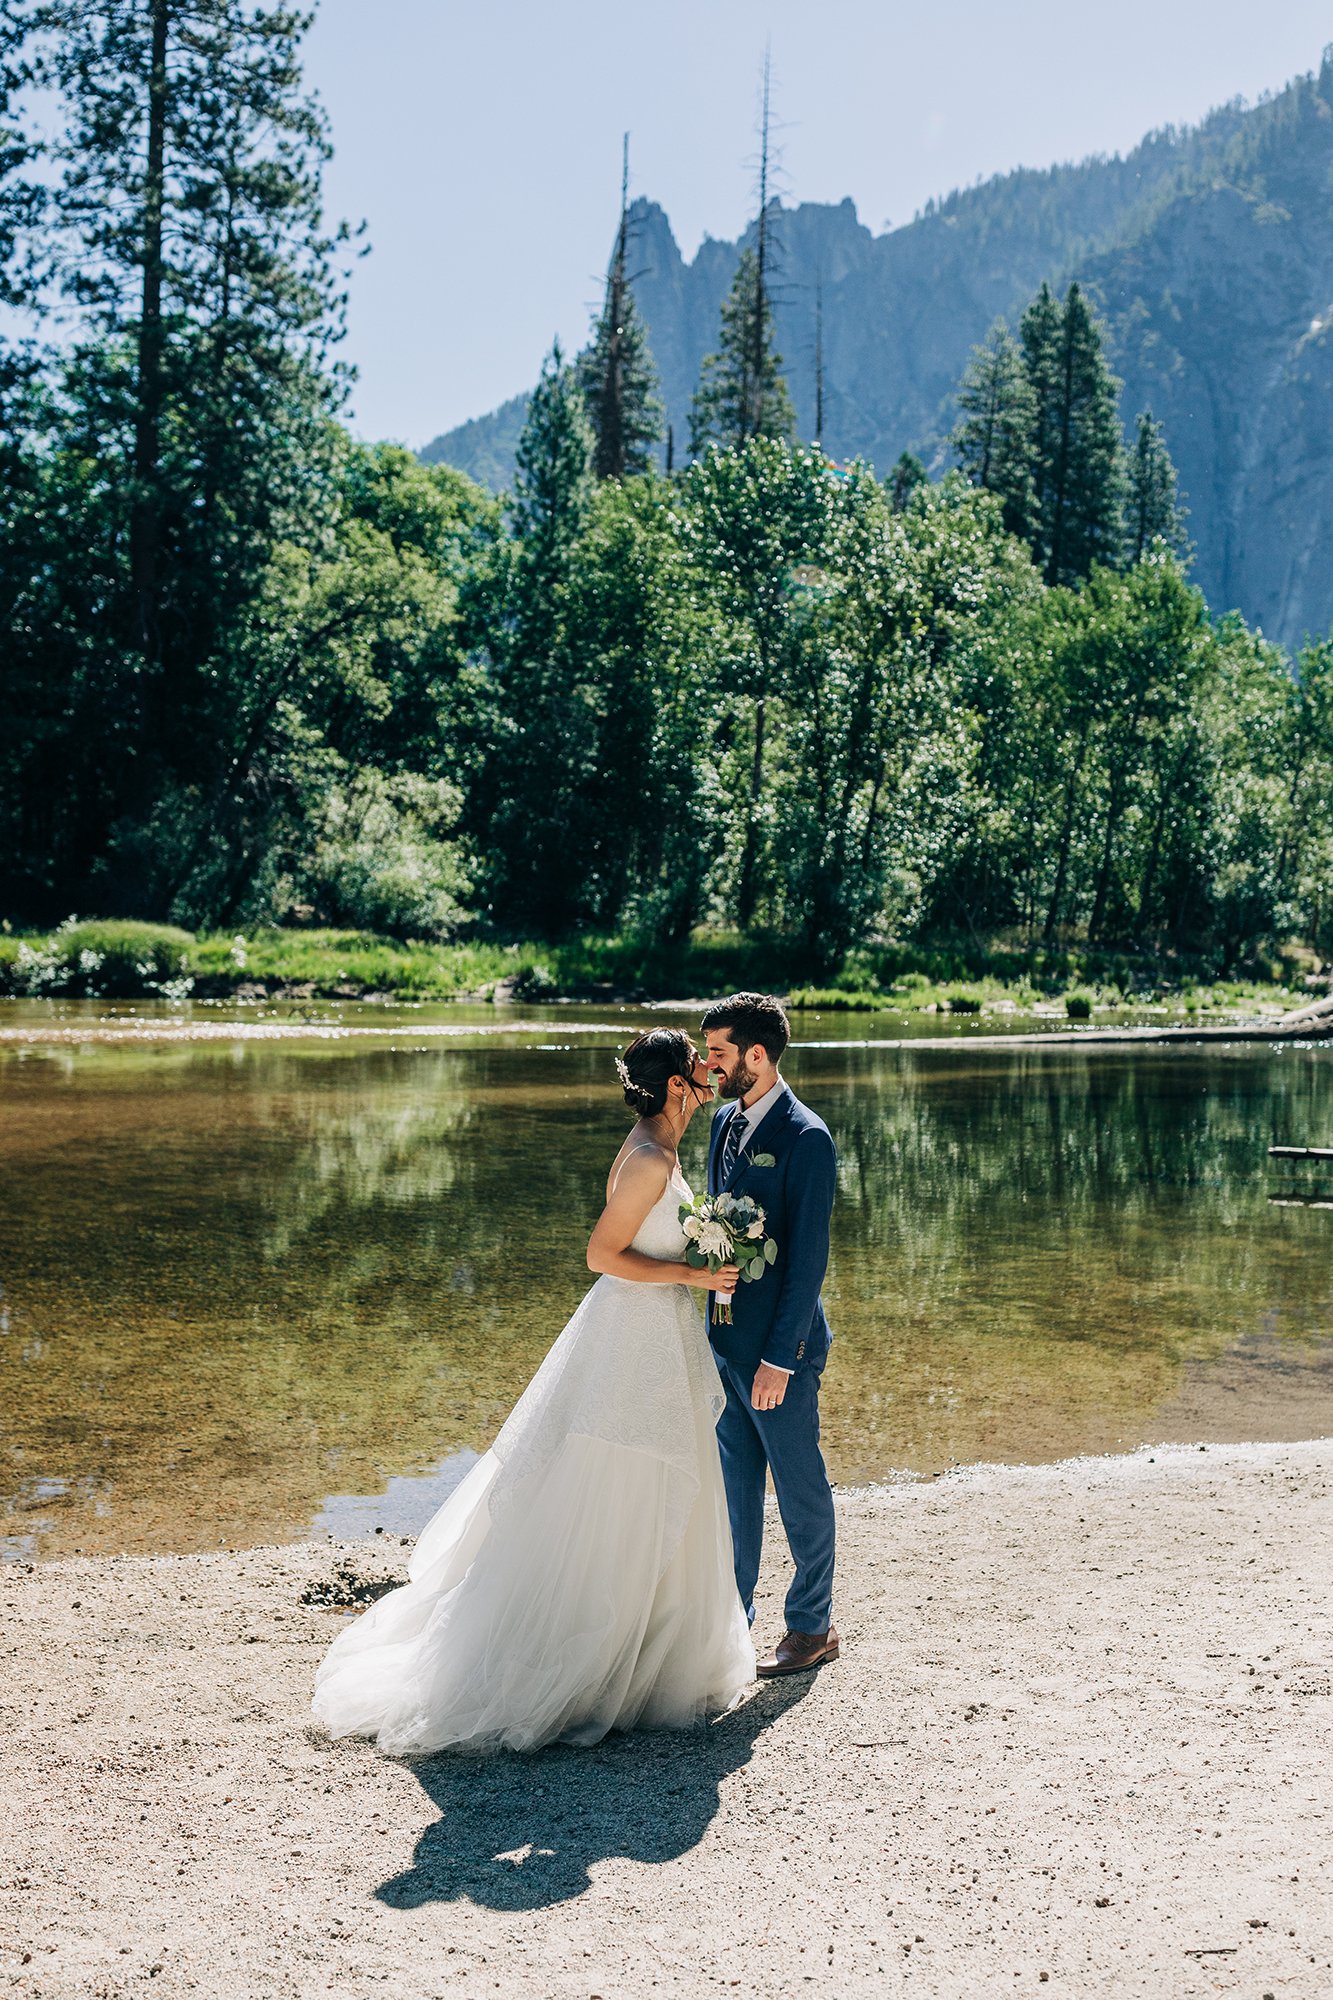 Yooree and Jarrod kiss after their wedding ceremony in Yosemite National Park in California.